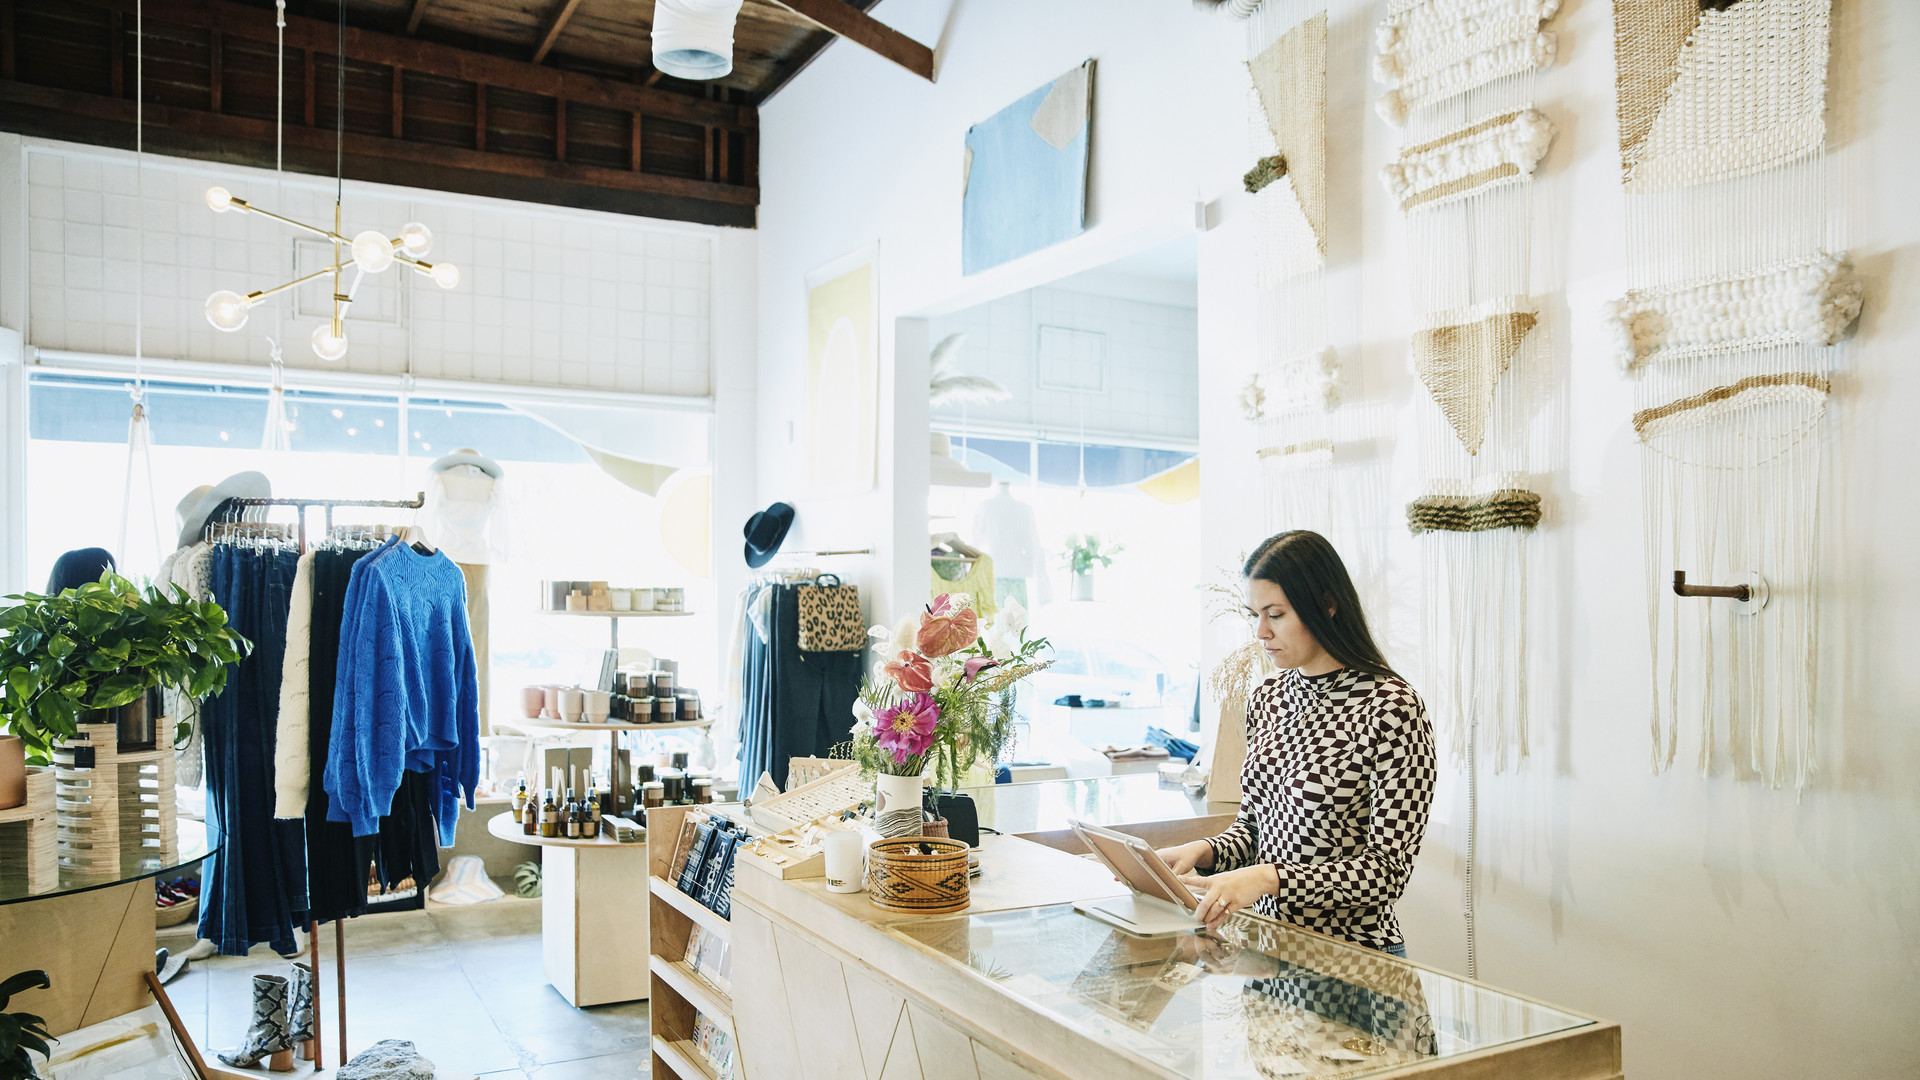 Shop owner working on digital tablet behind counter in clothing boutique